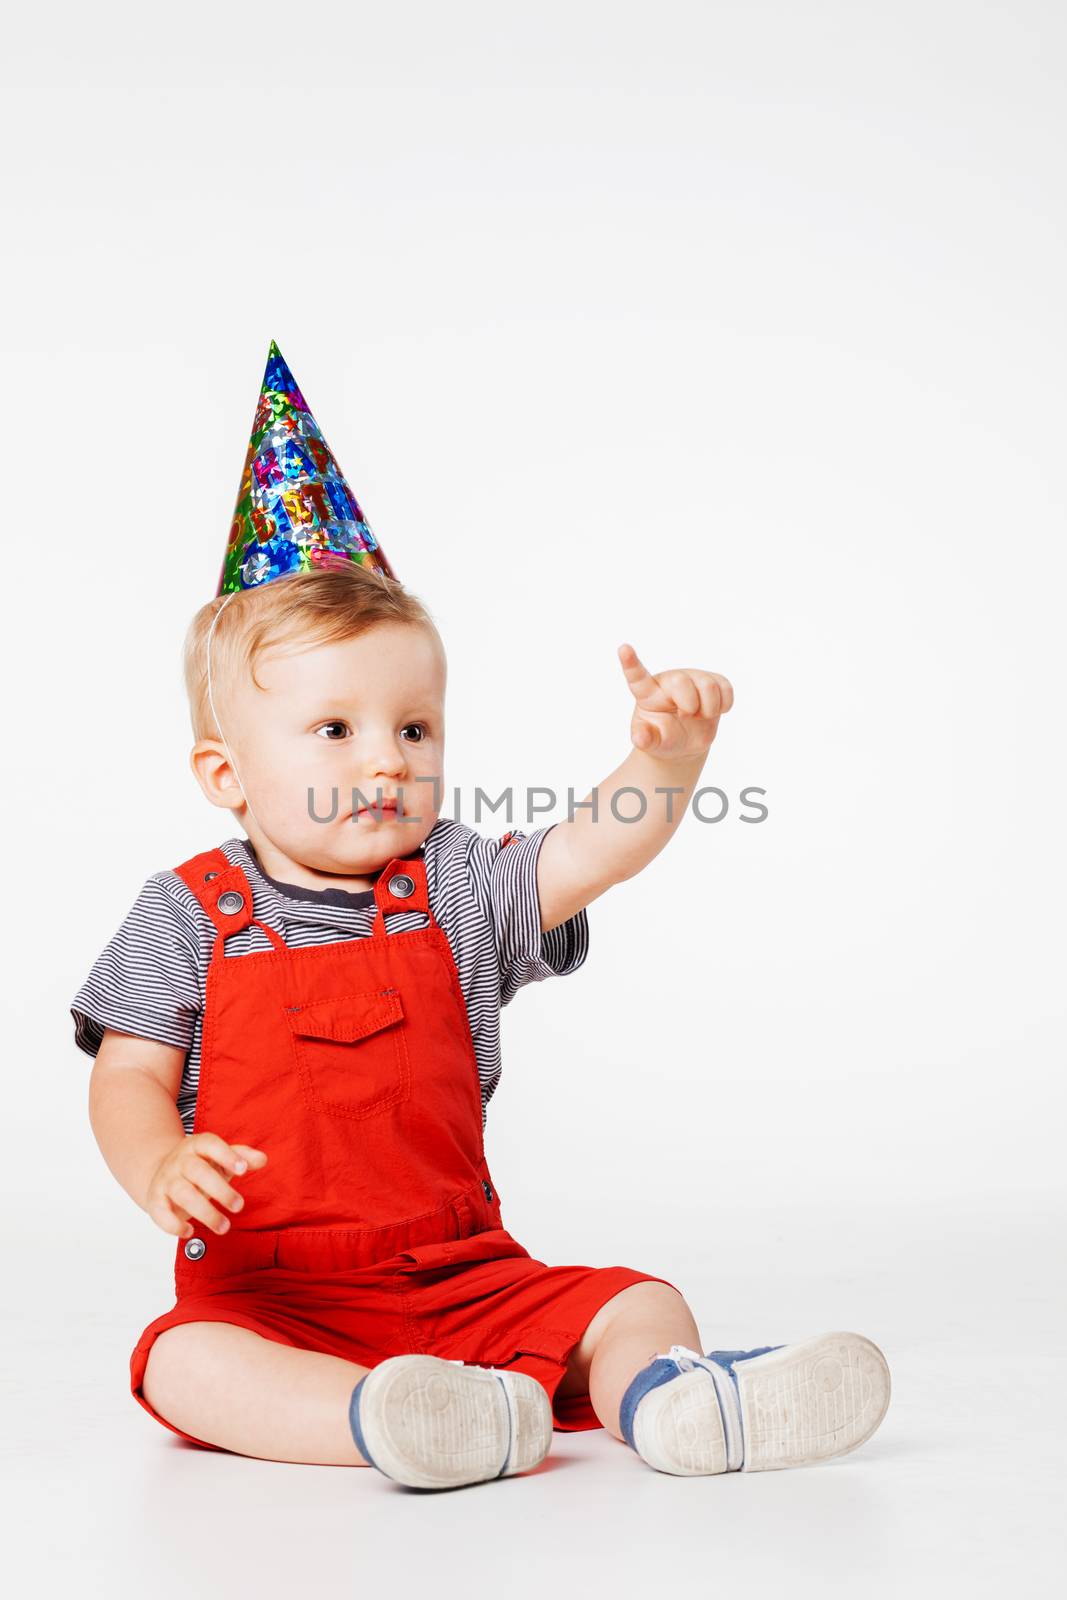 baby boy with birthday hat in overall red shorts